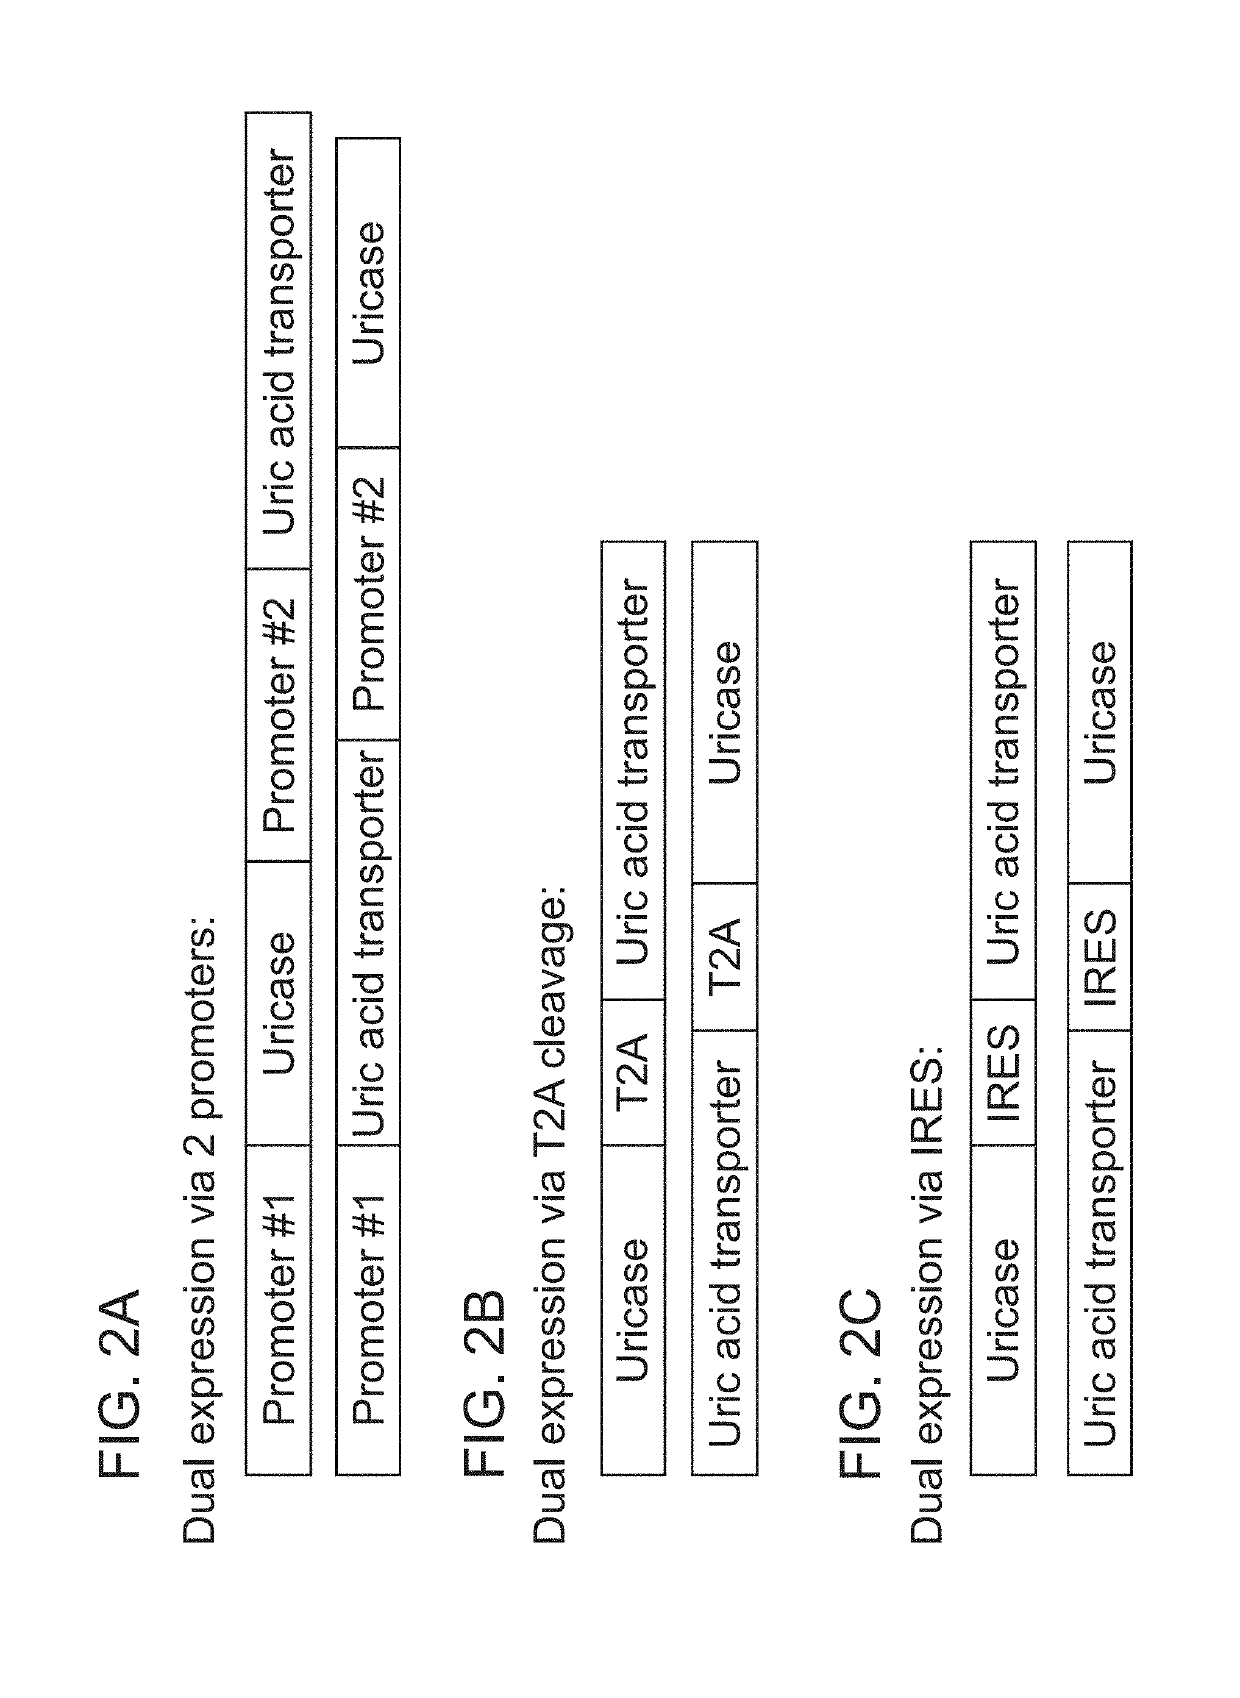 Therapeutic cell systems and methods for treating hyperuricemia and gout